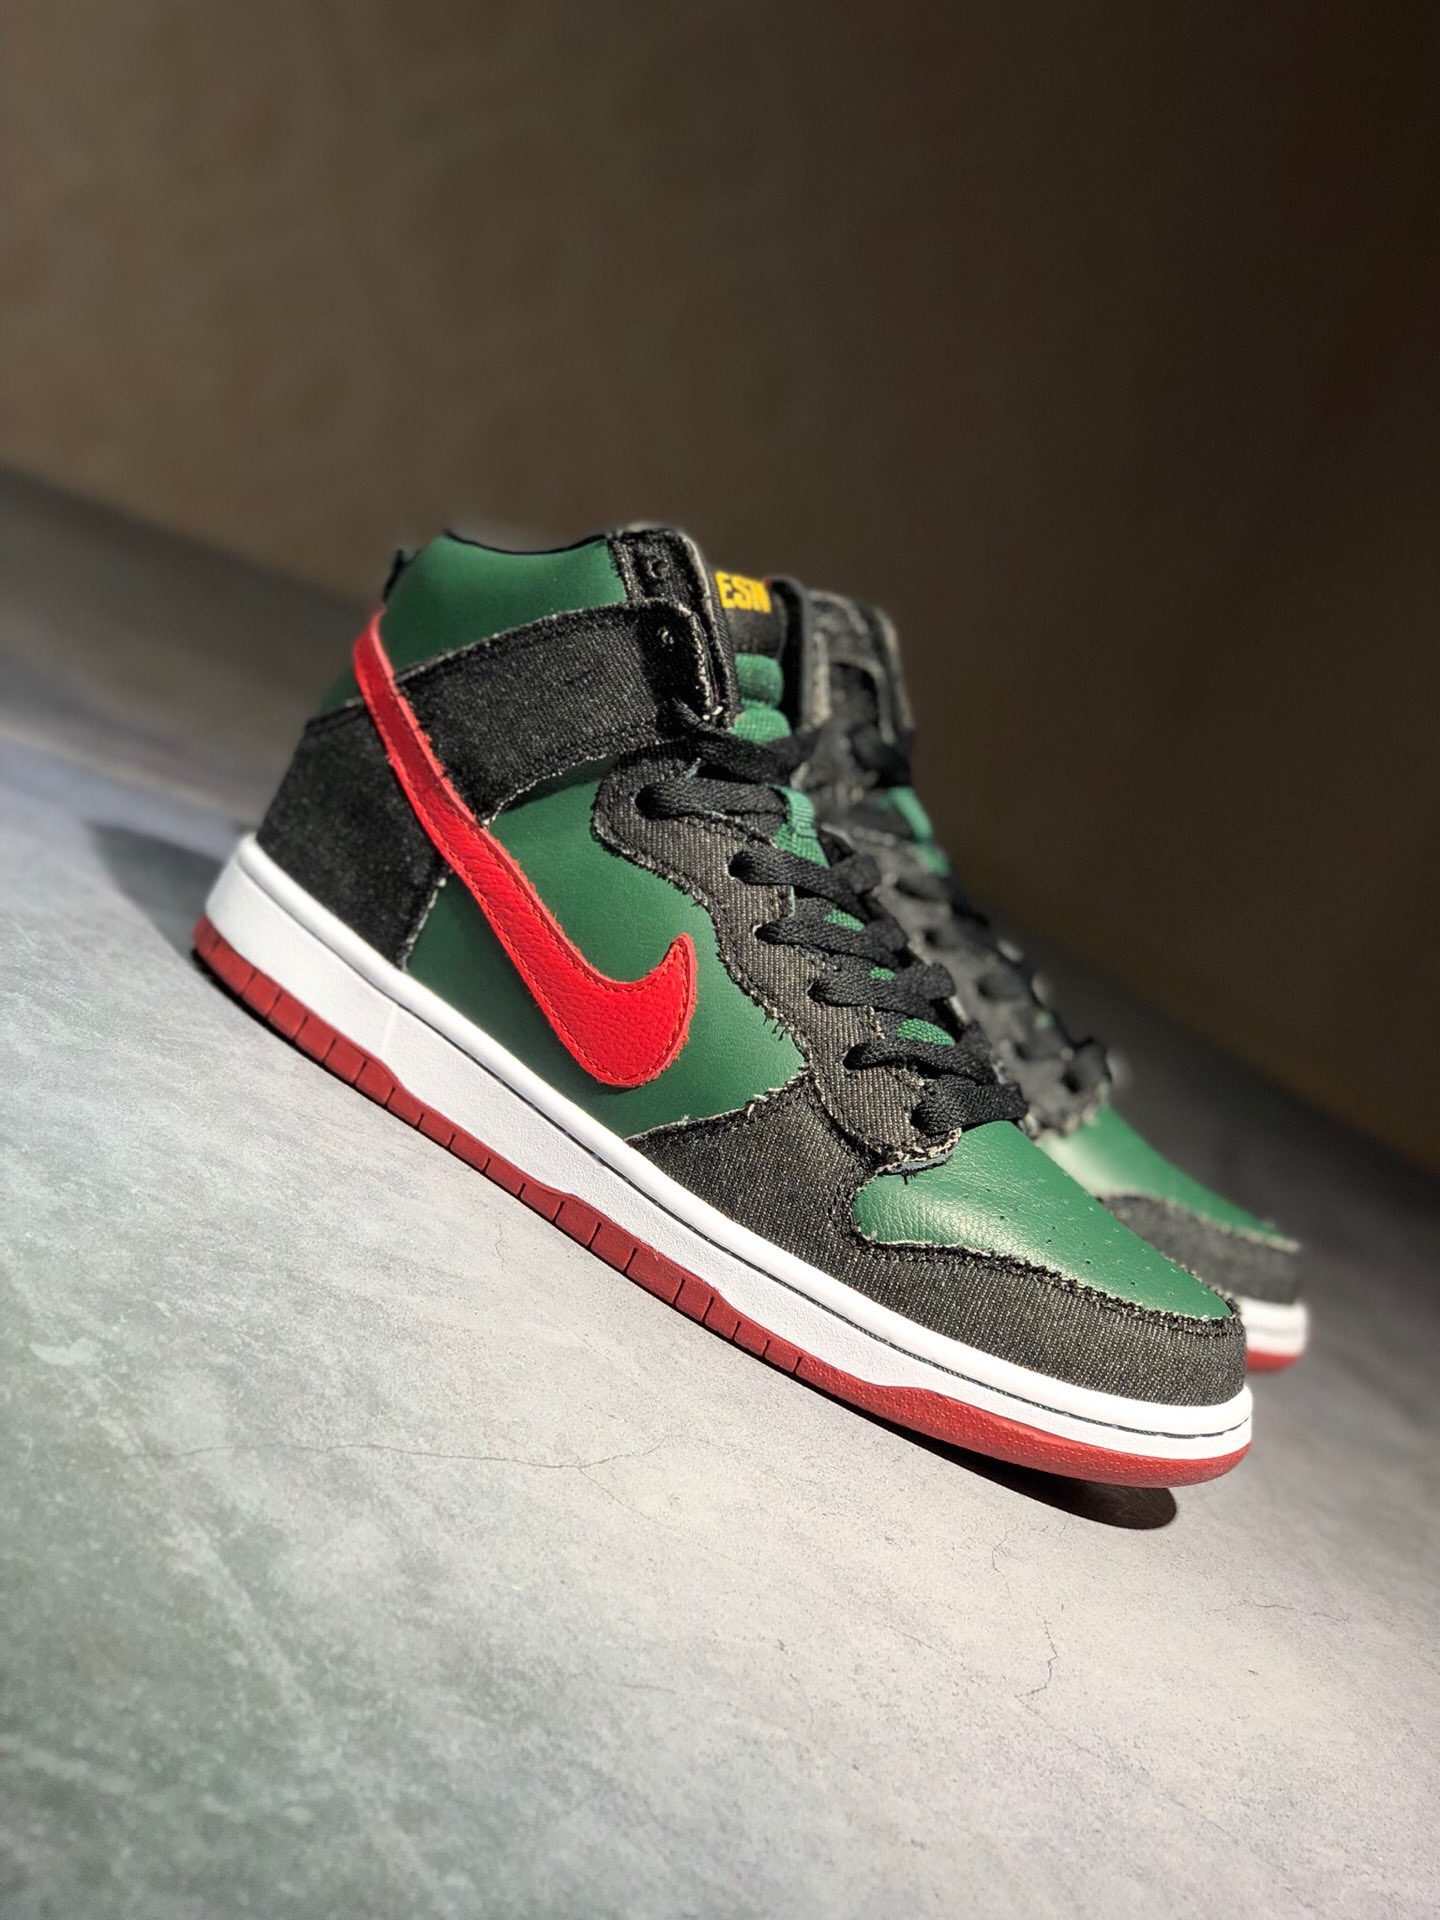 Authentic Nike Dunk SB High RESN Gucci